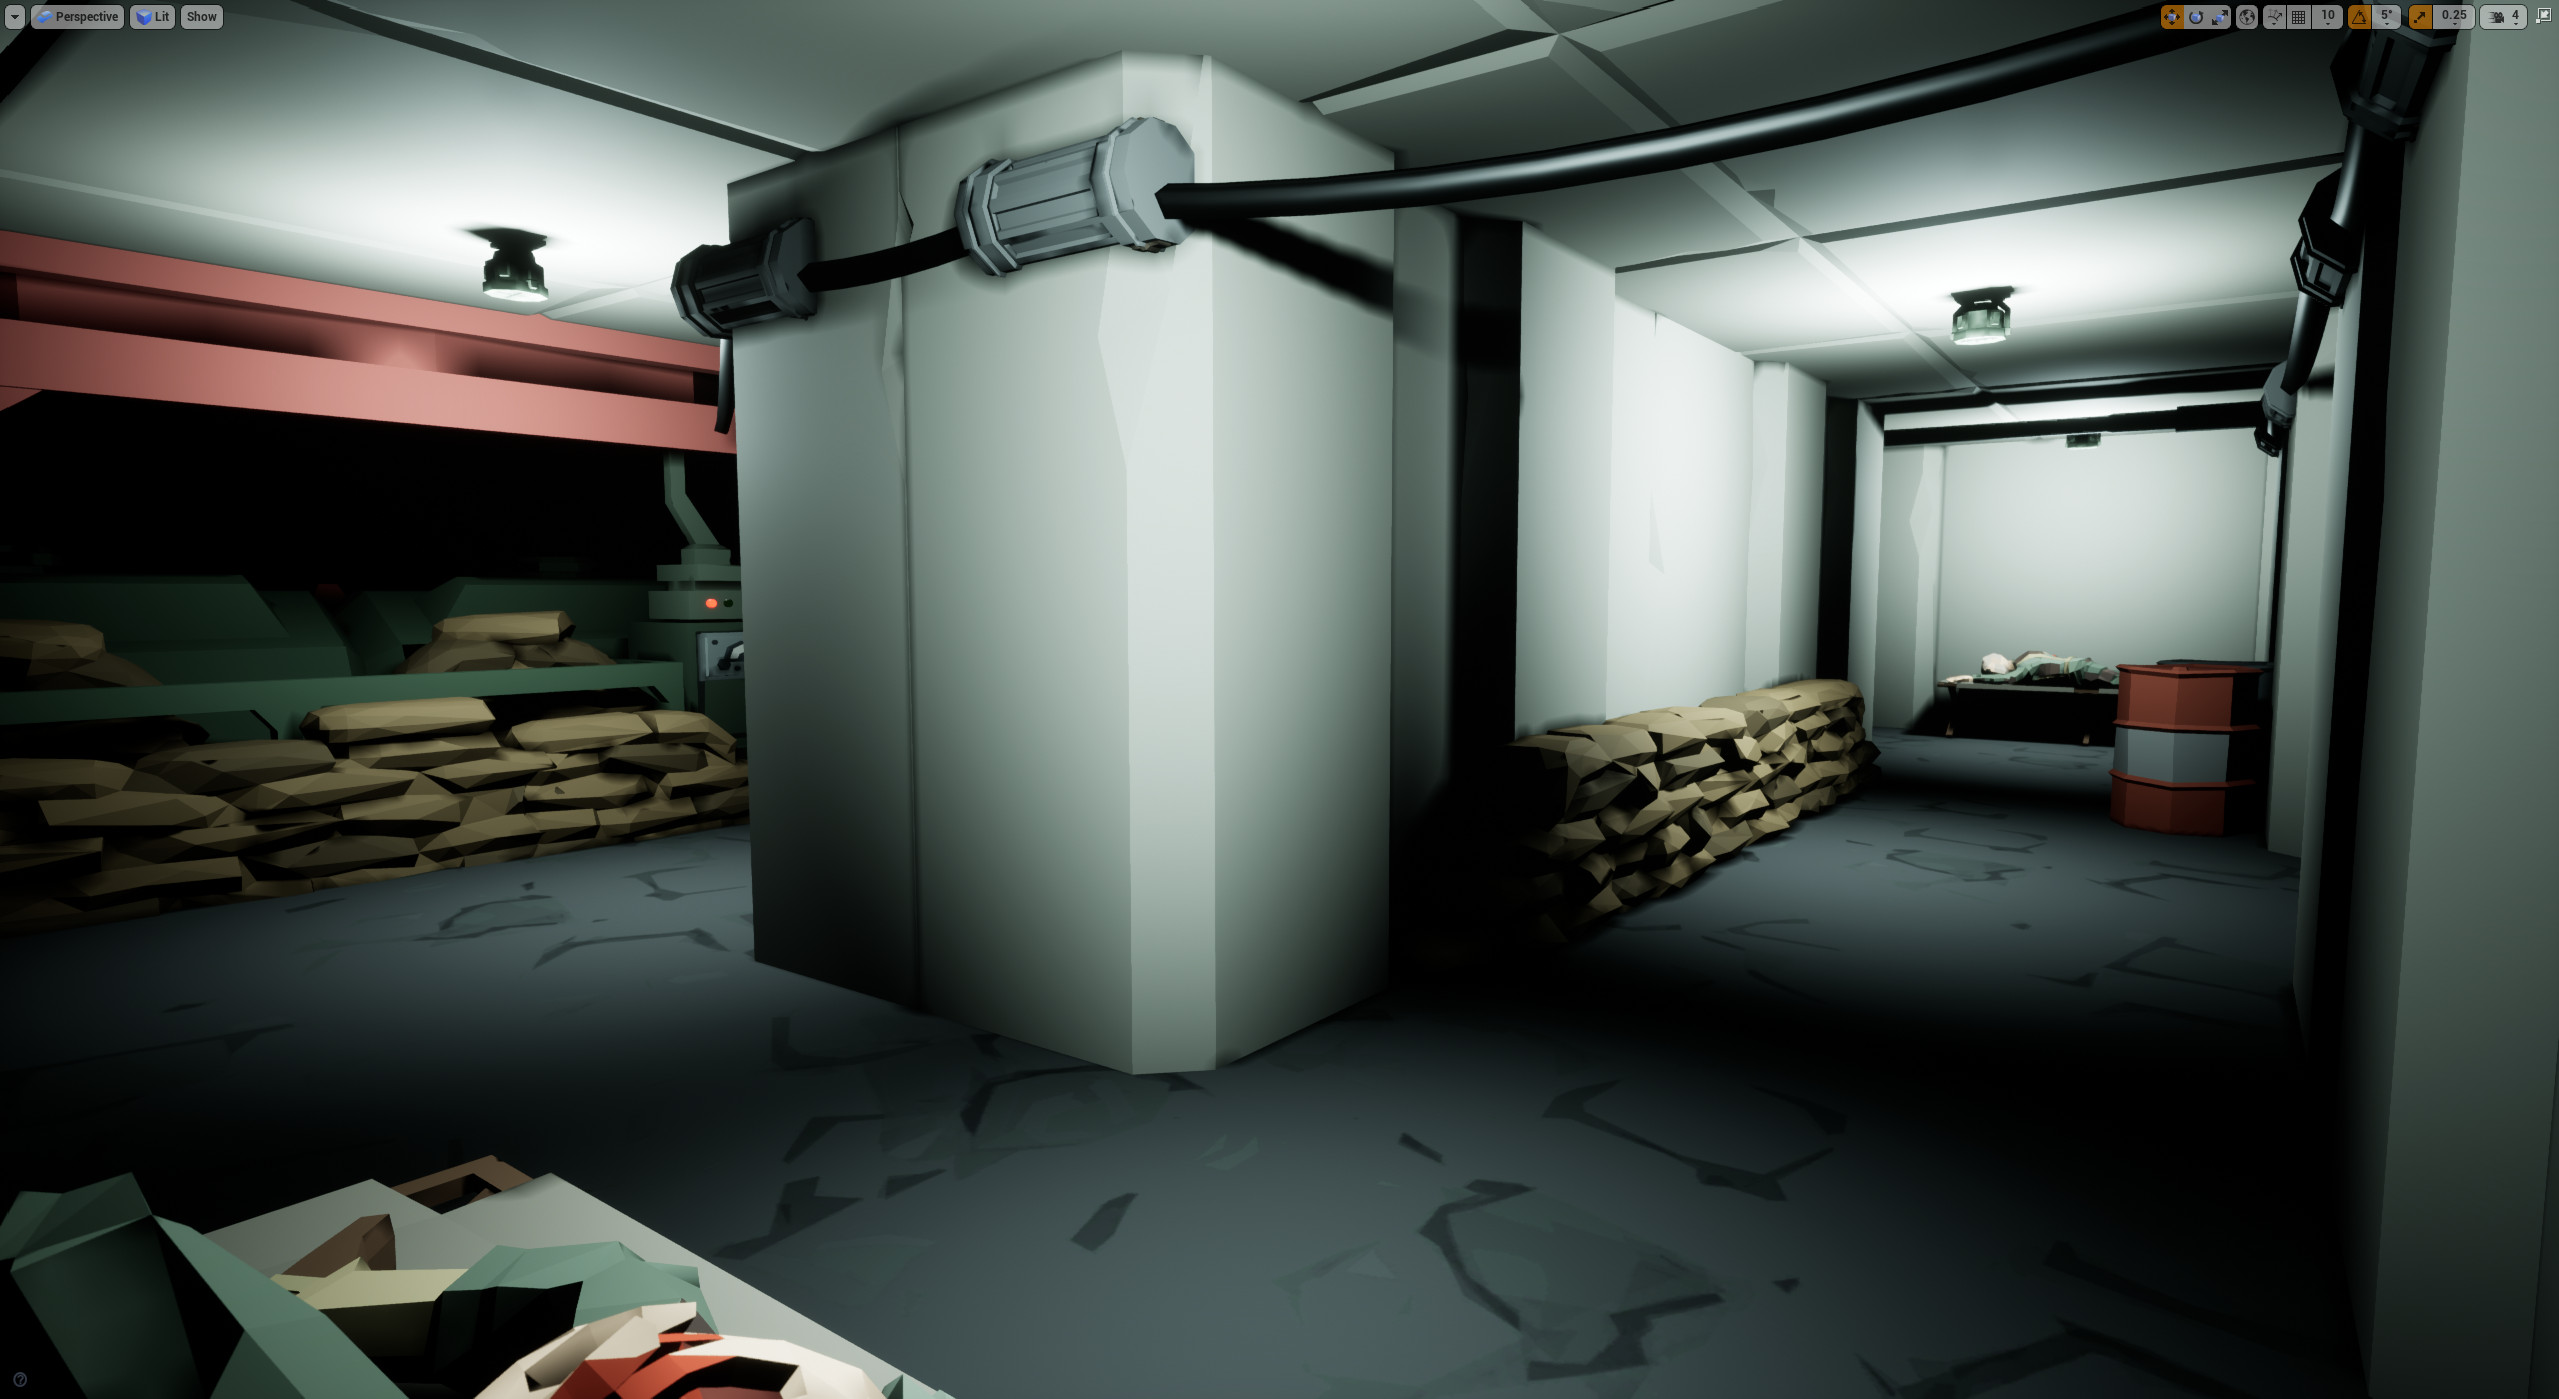 The corridor leading to the generator the player needs to activate in order to continue. This is the first obstruction challenge the player faces.